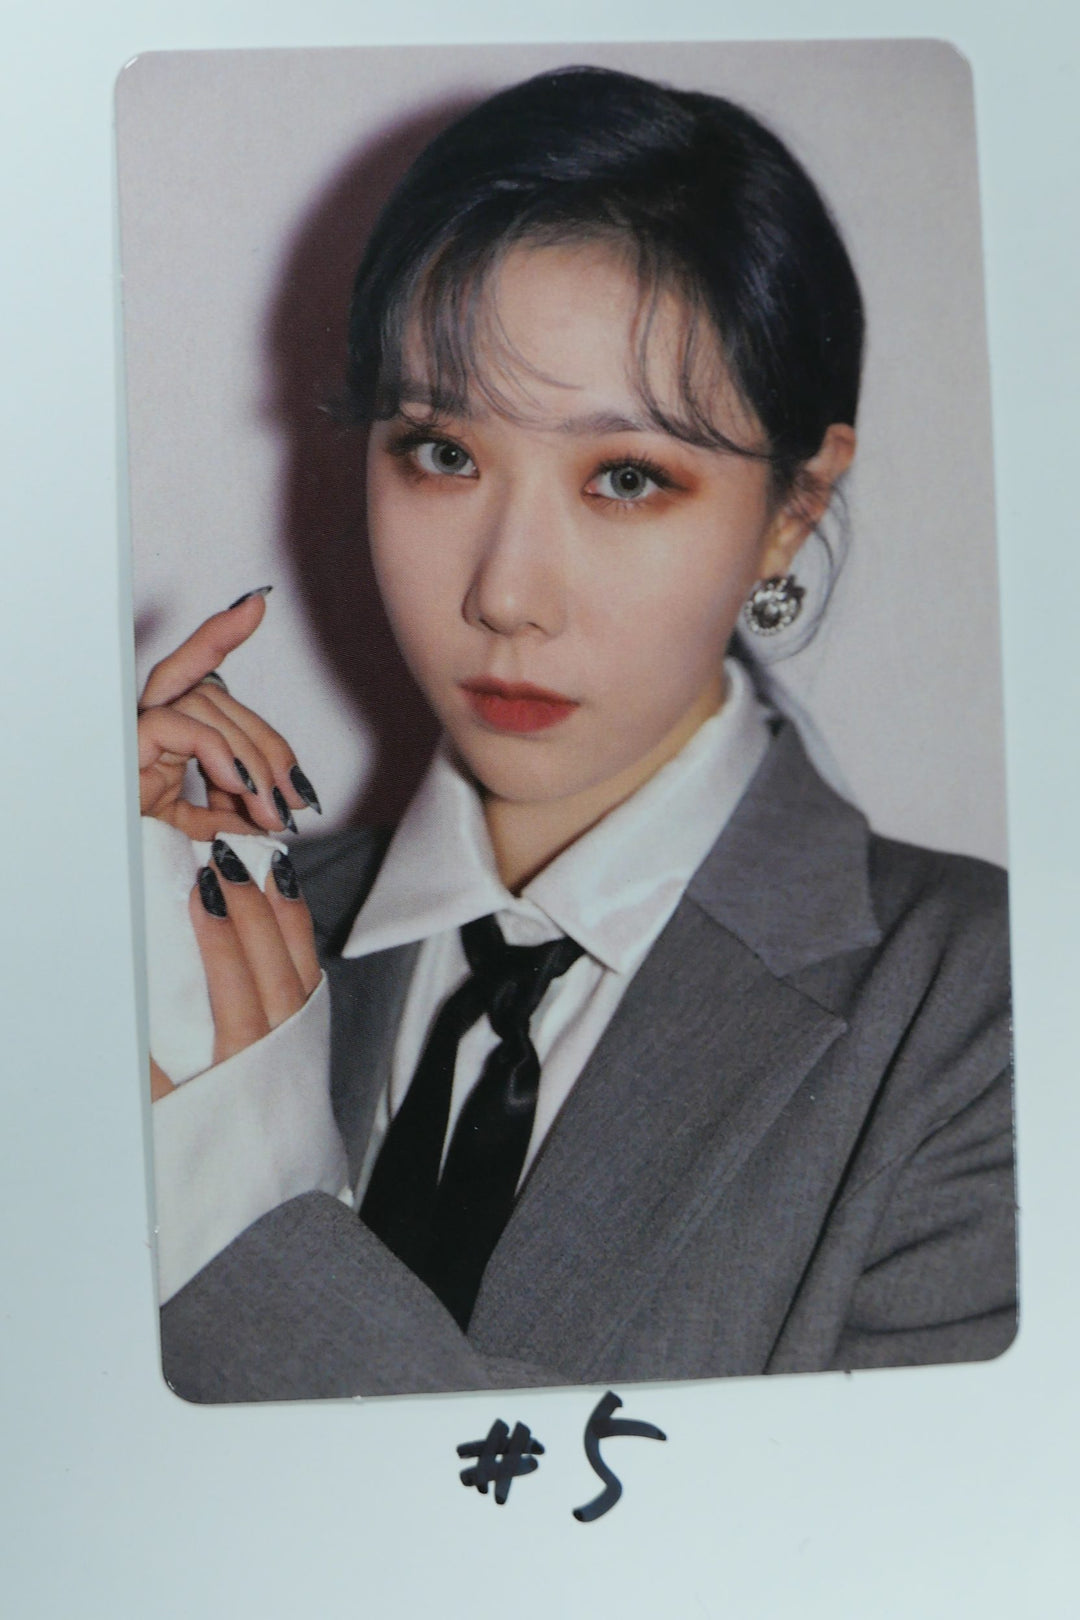 Dreamcatcher "Road To Utopia" - Handong Official Photocard